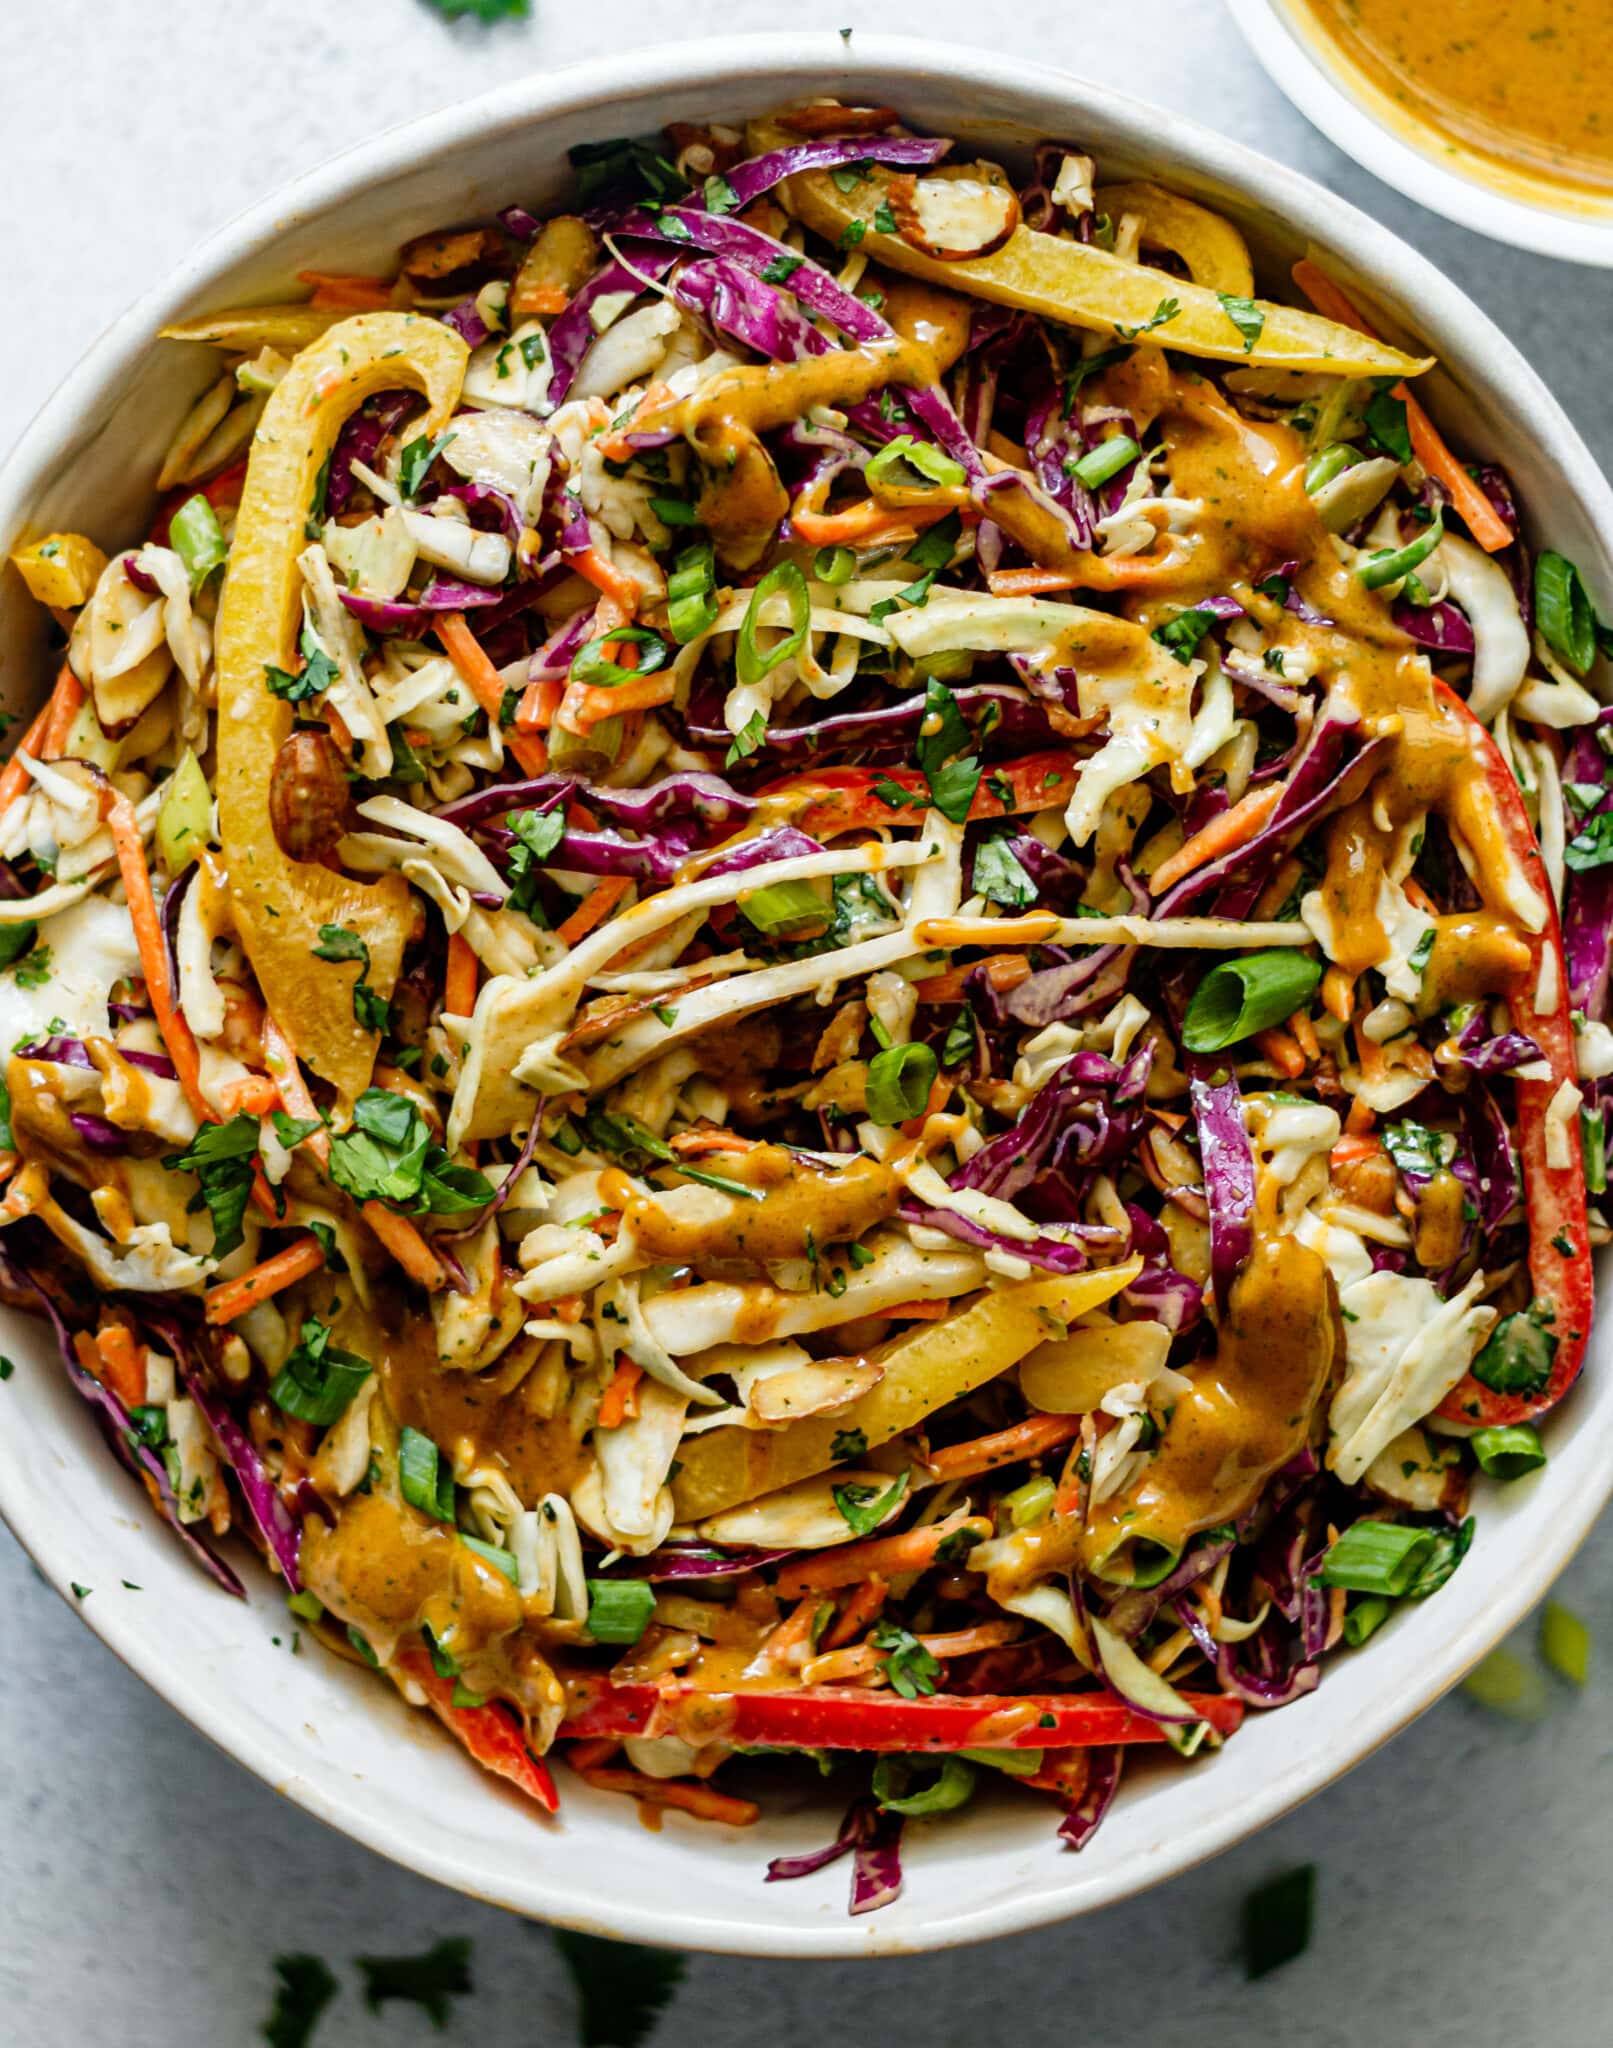 Thai Crunch Salad with Creamy Peanut Dressing - All the Healthy Things